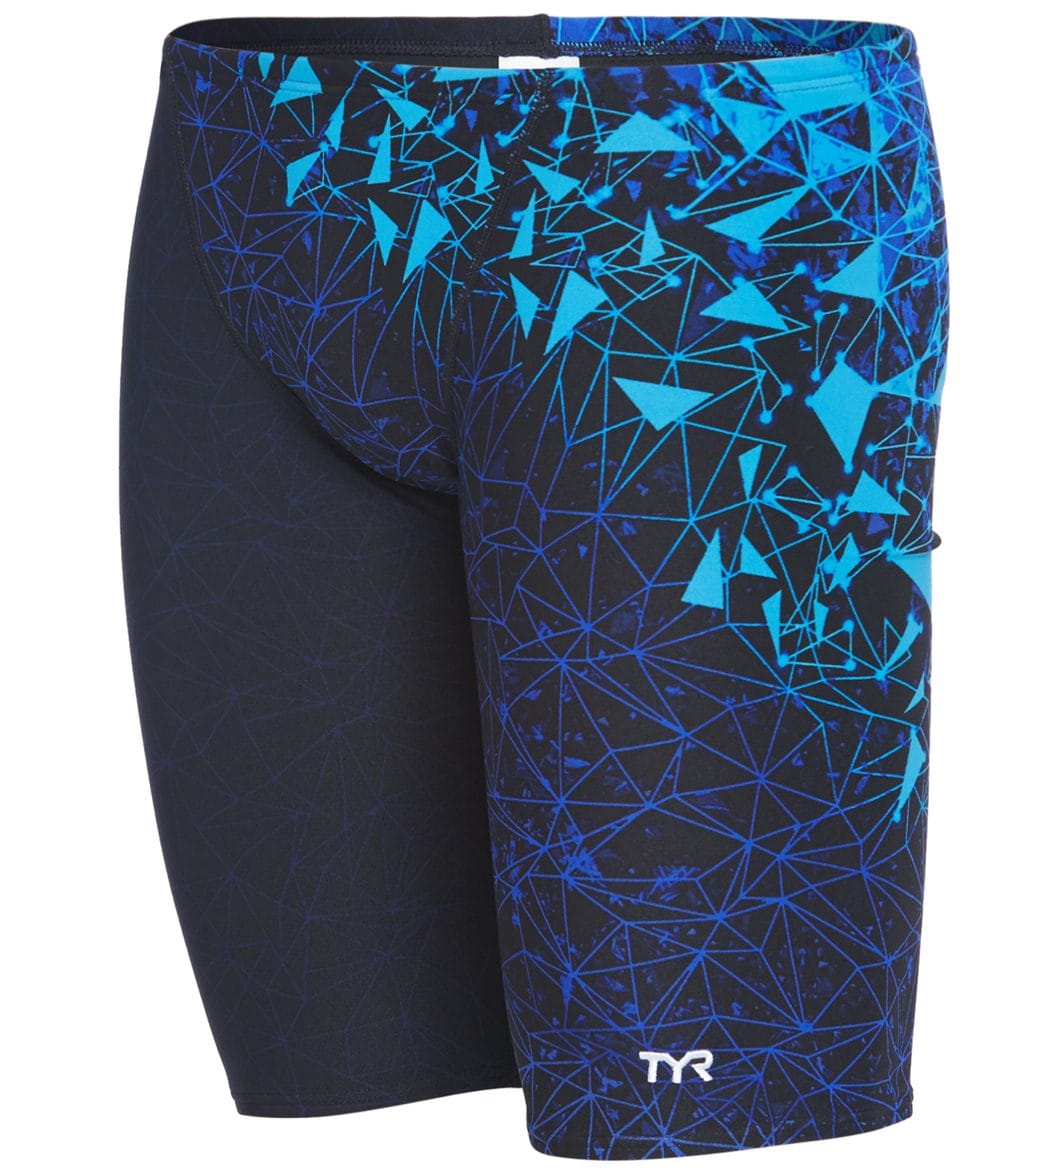 TYR Men's Orion Jammer Swimsuit at SwimOutlet.com - Free Shipping